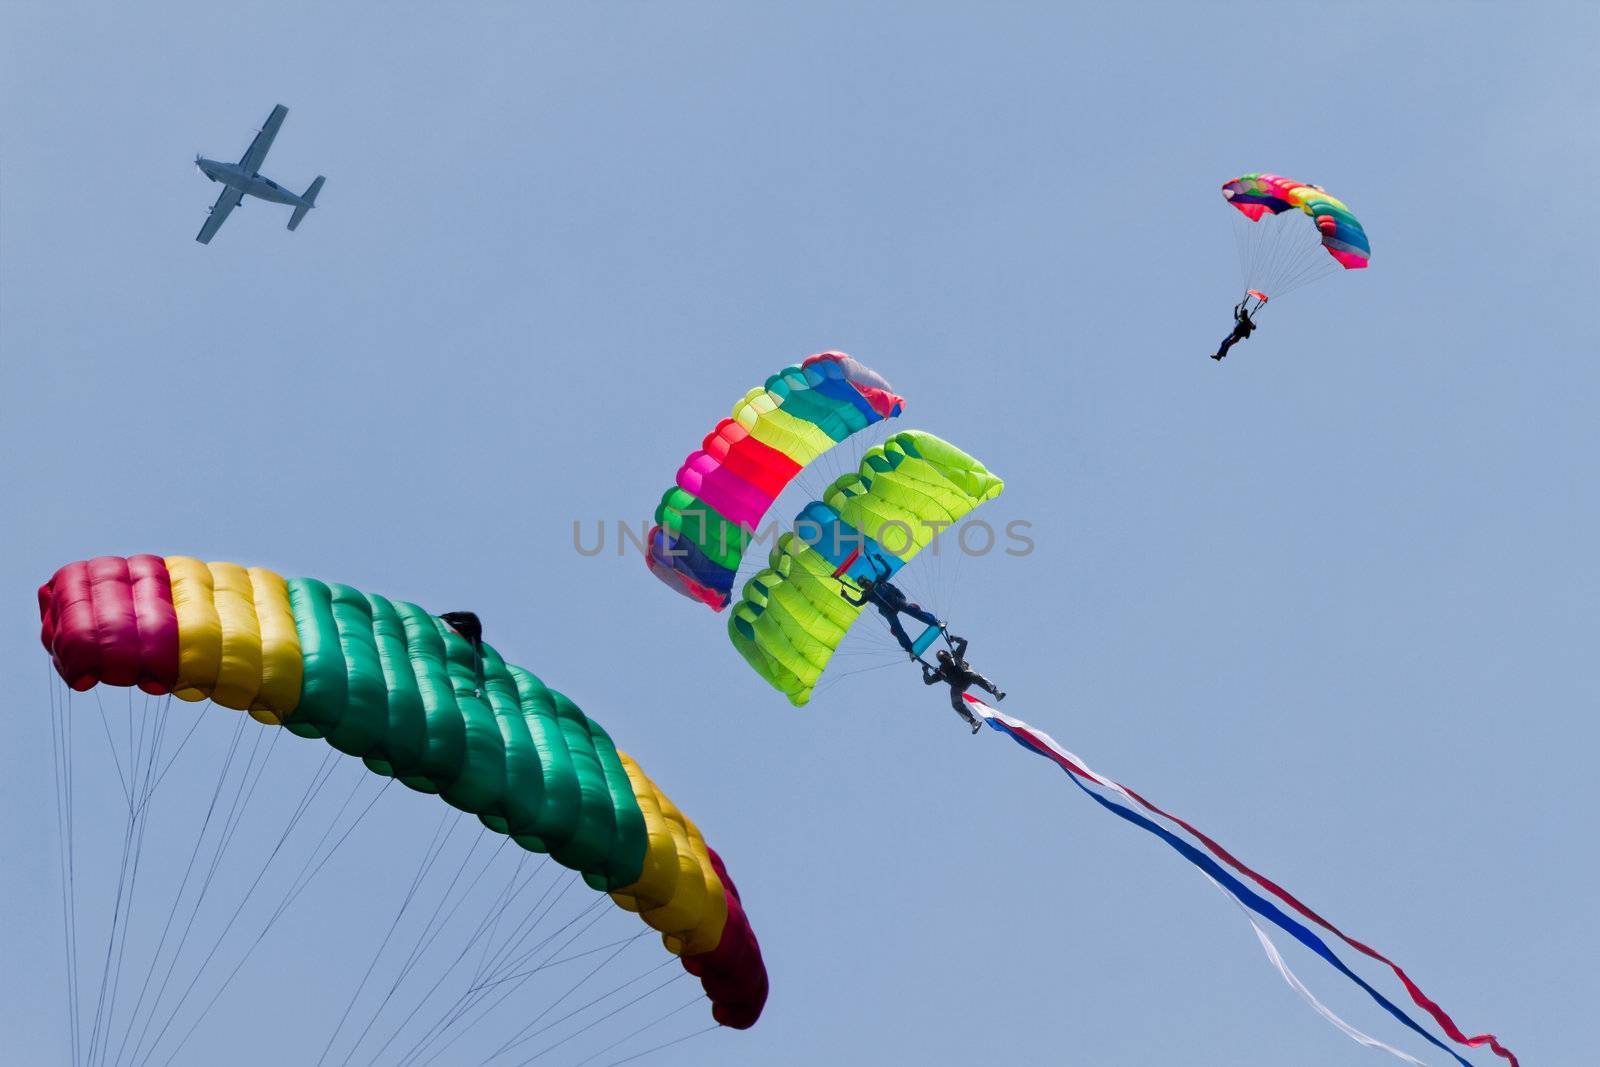 Skydiving - Parachutists demonstrate jumping from airplane